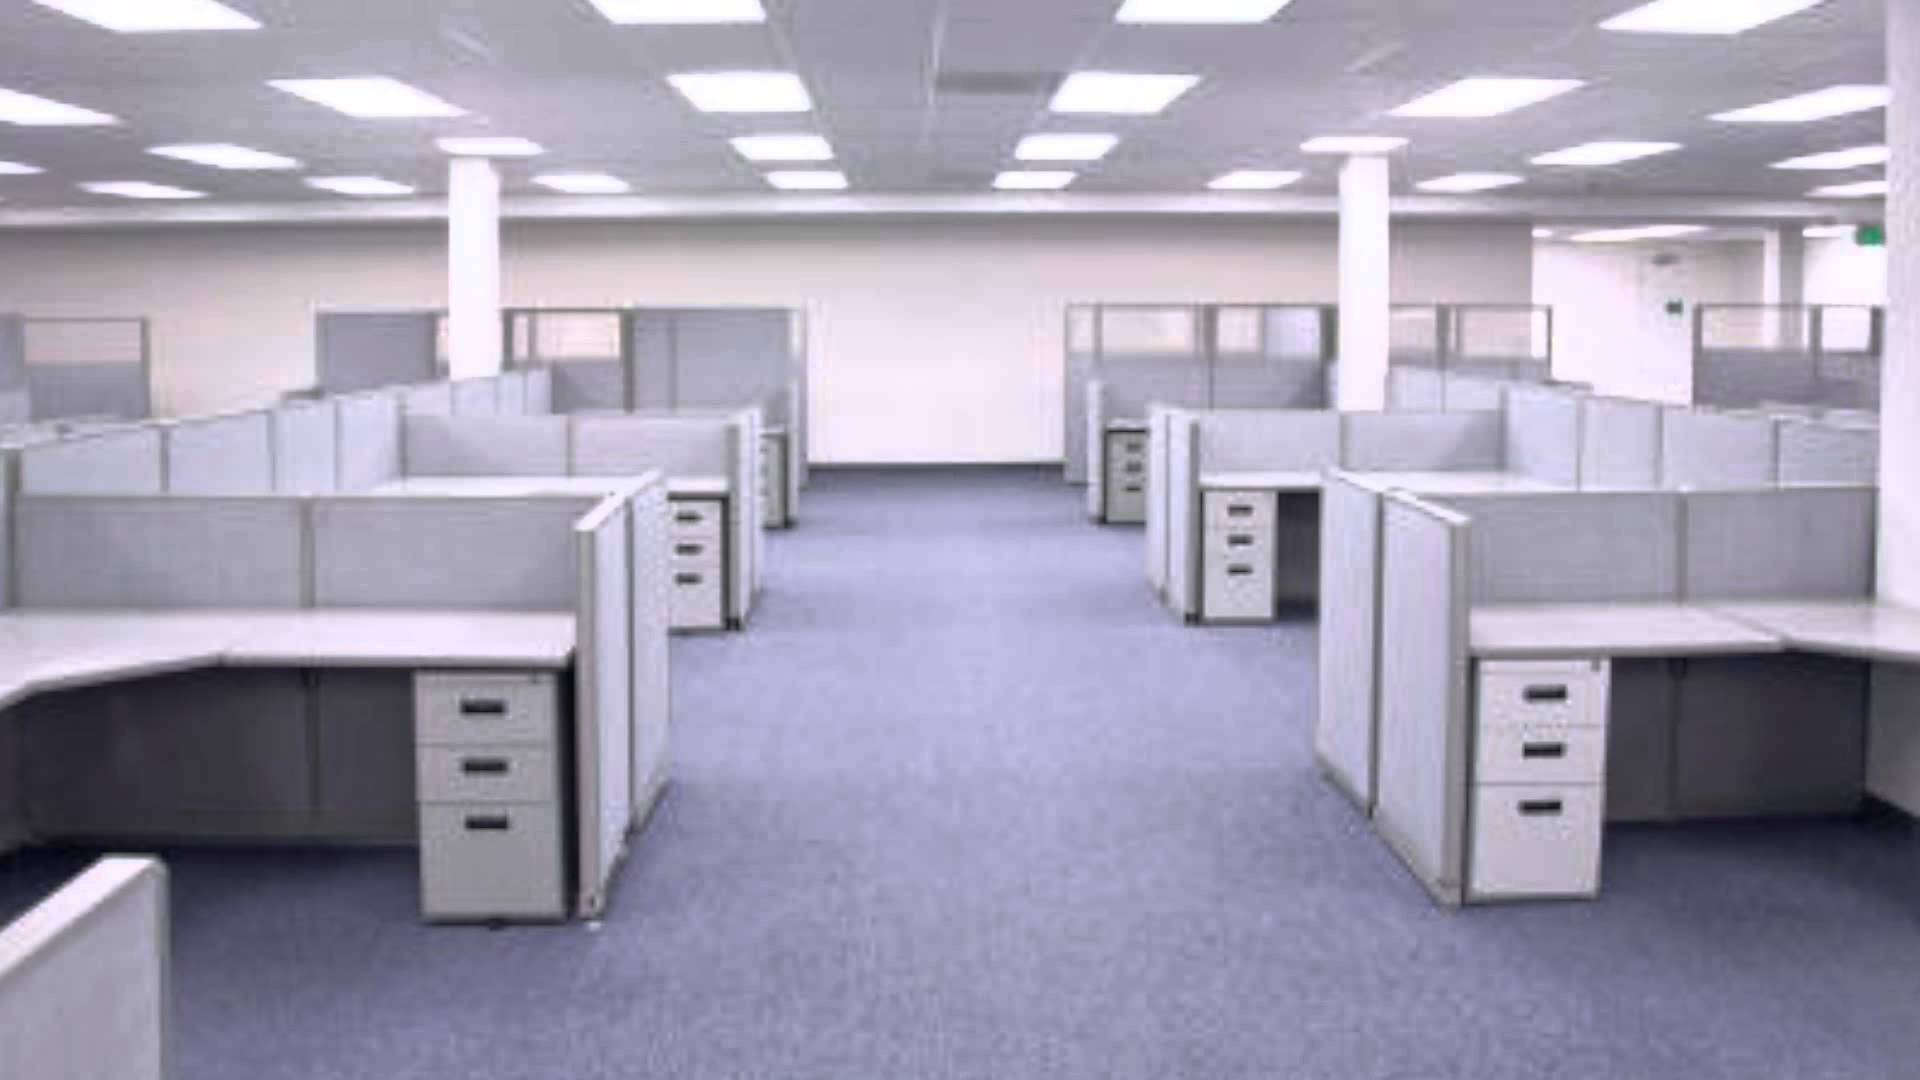 Room Tone Large Empty Office Sound FX - YouTube